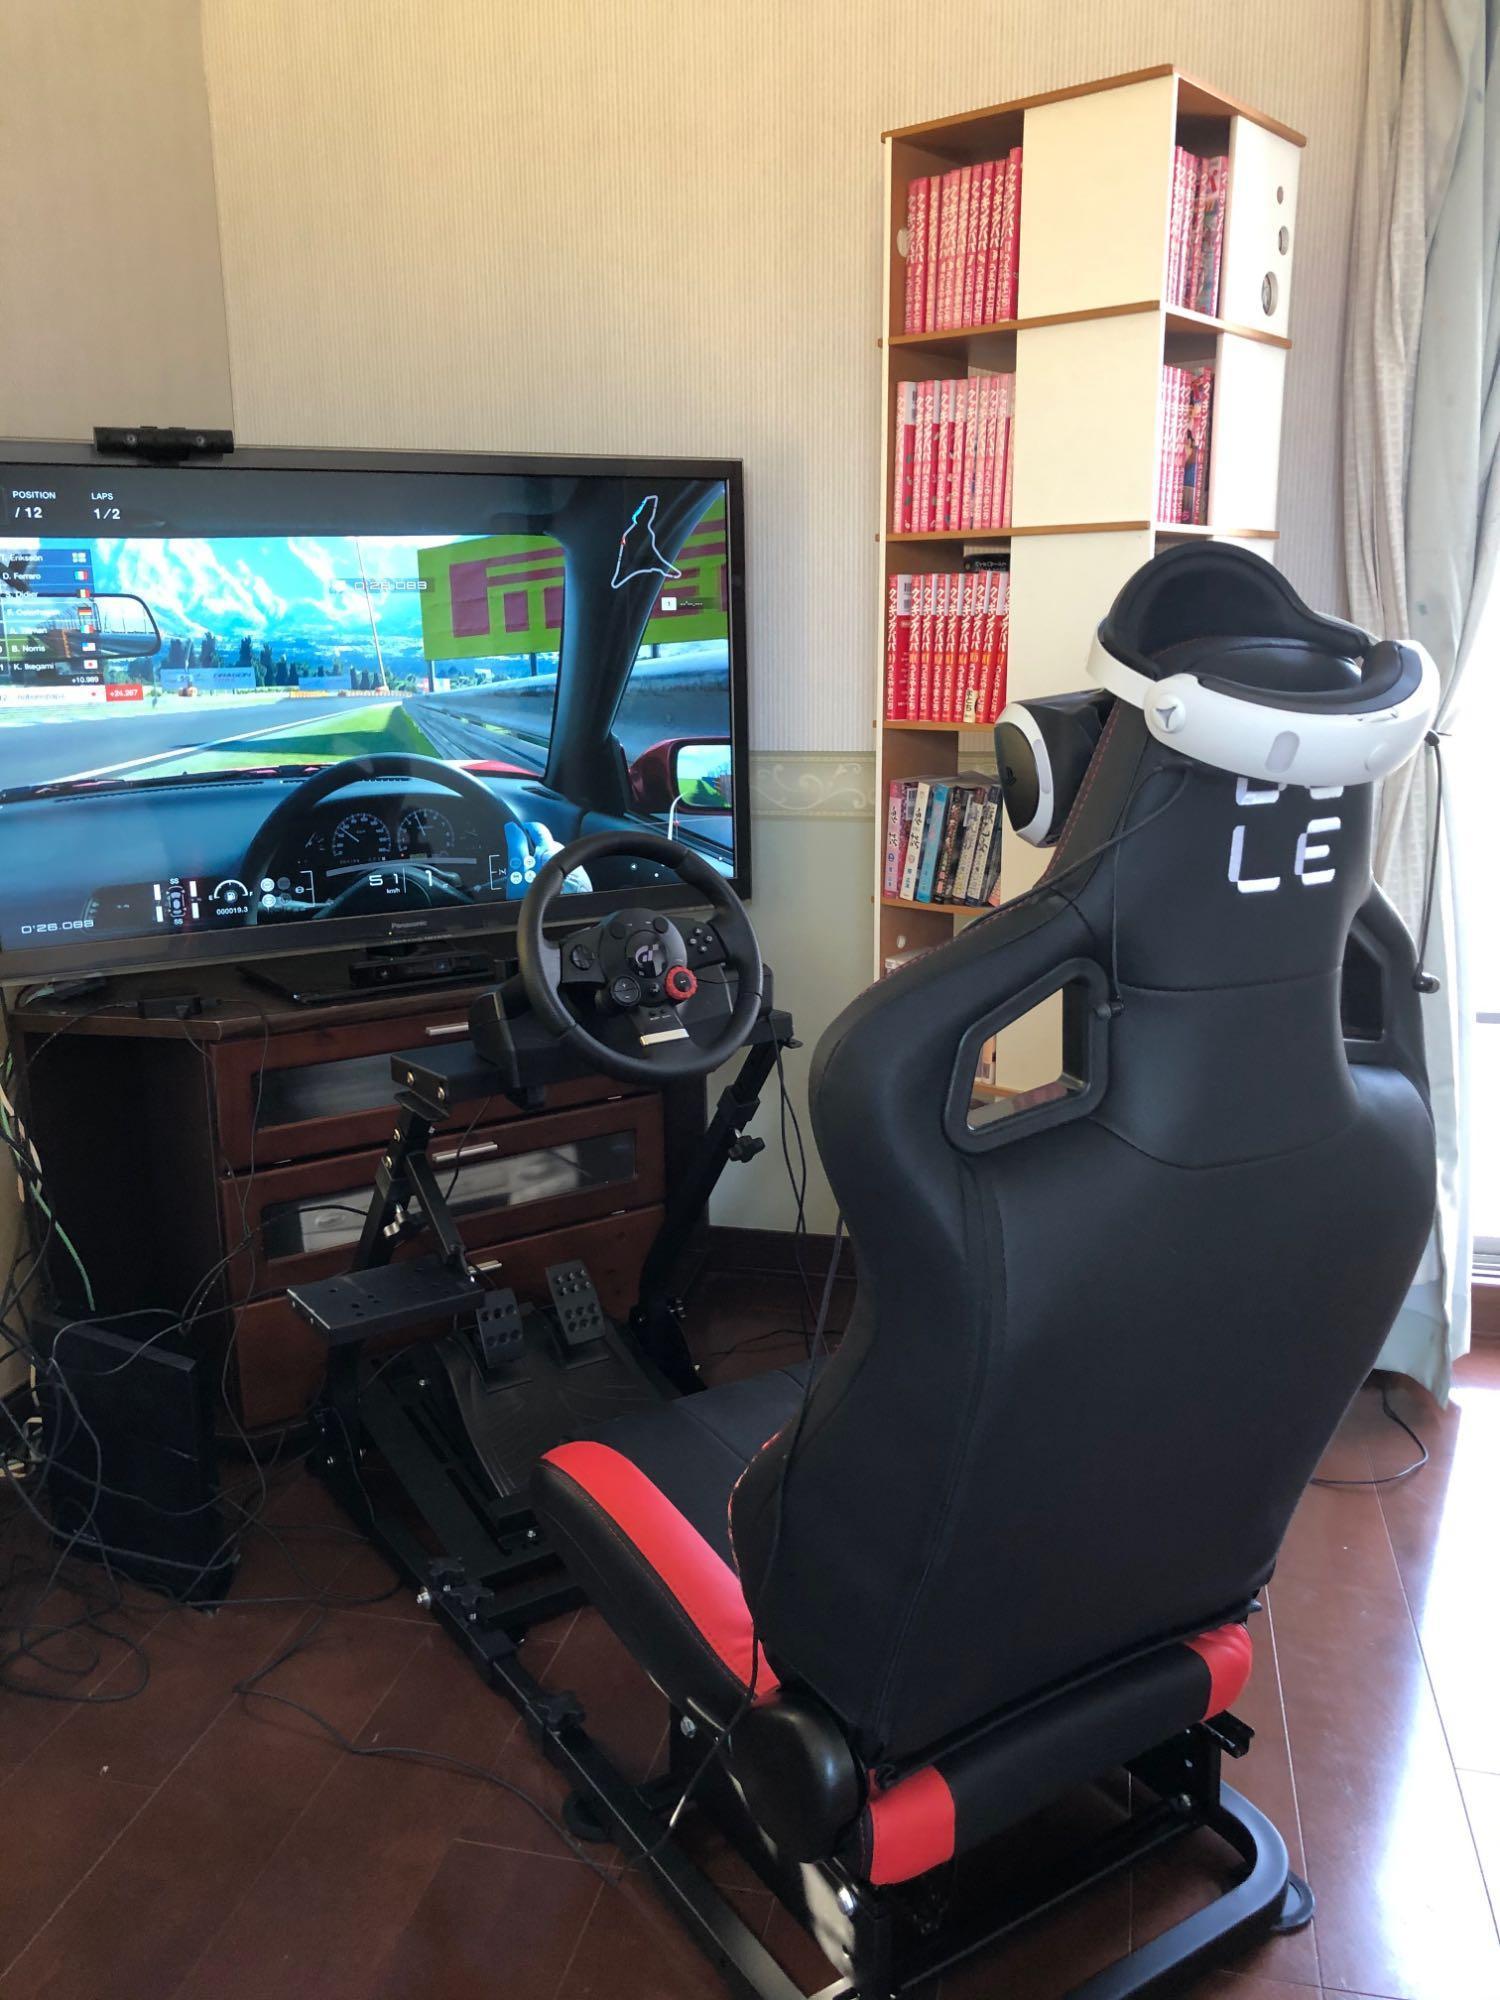 Racing Chair DRS-1 レーシング チェア 椅子 + AP2 Racing Wheel Stand 